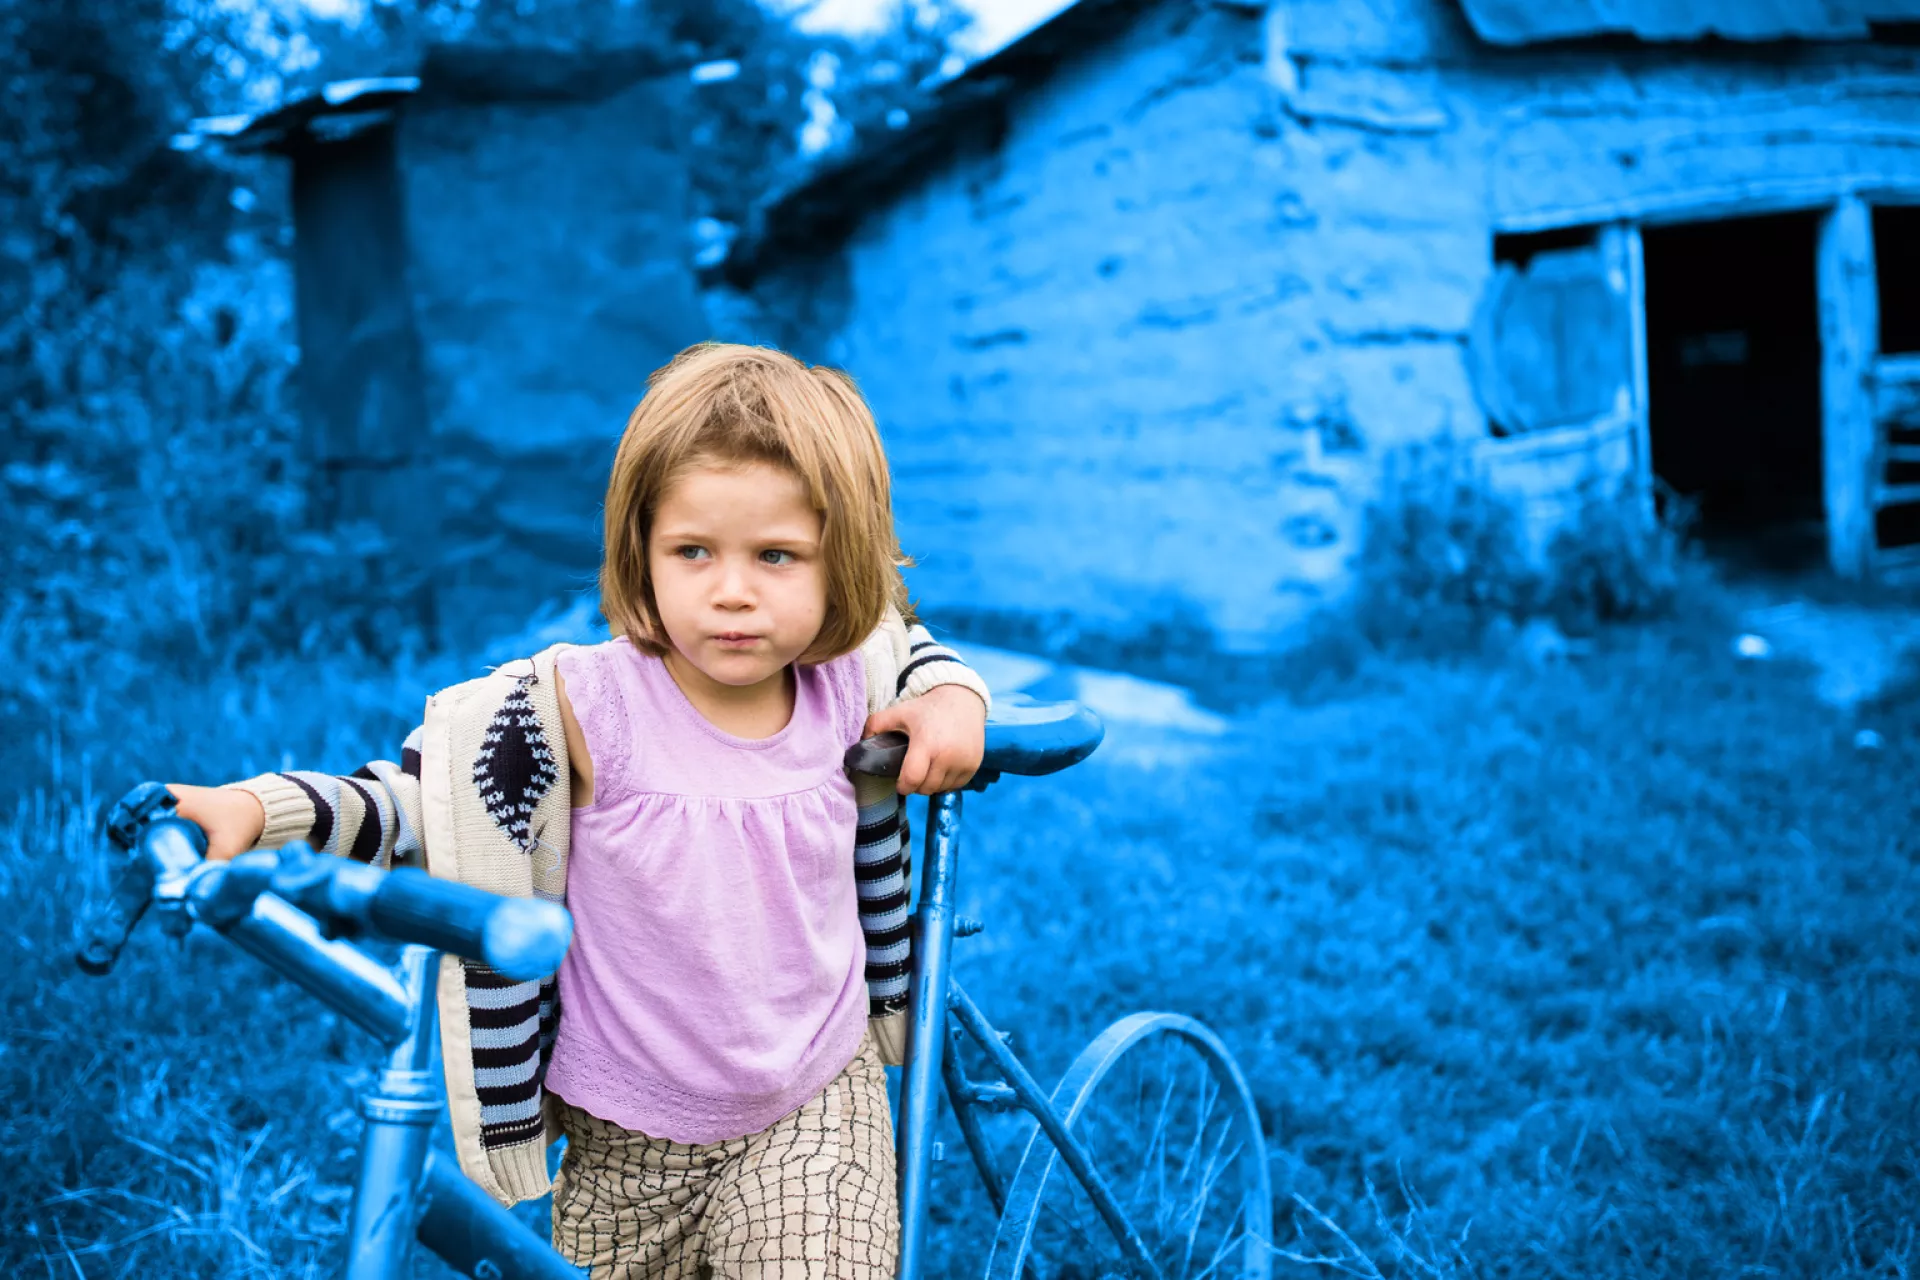 Four-year-old Flori Maria plays on a broken bike outside her family home in Romania.